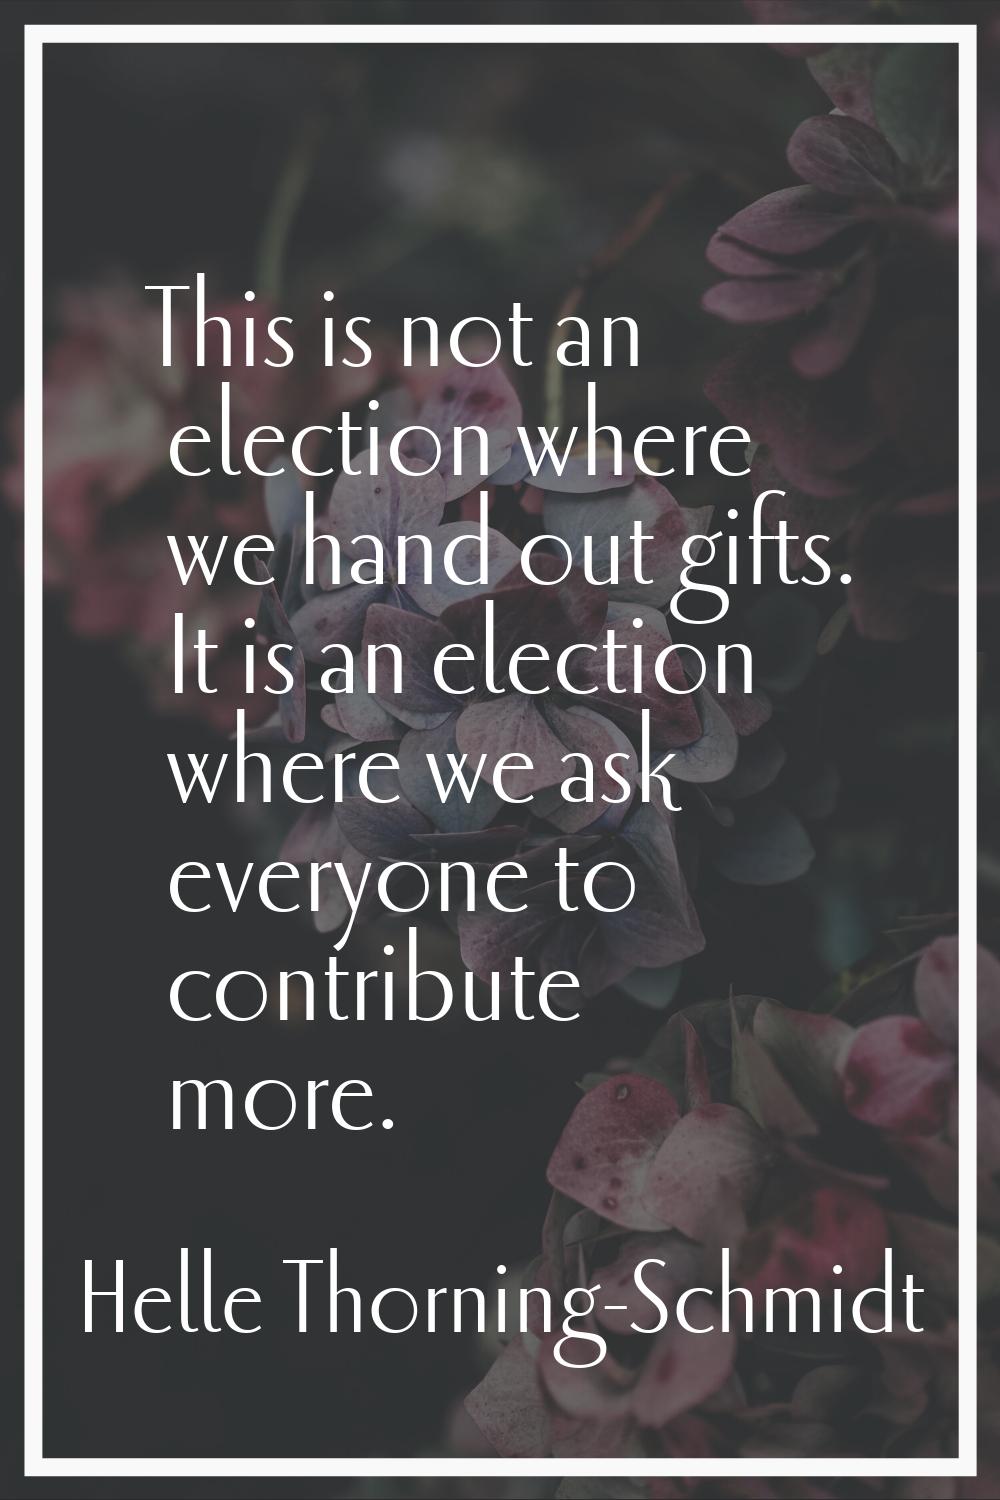 This is not an election where we hand out gifts. It is an election where we ask everyone to contrib